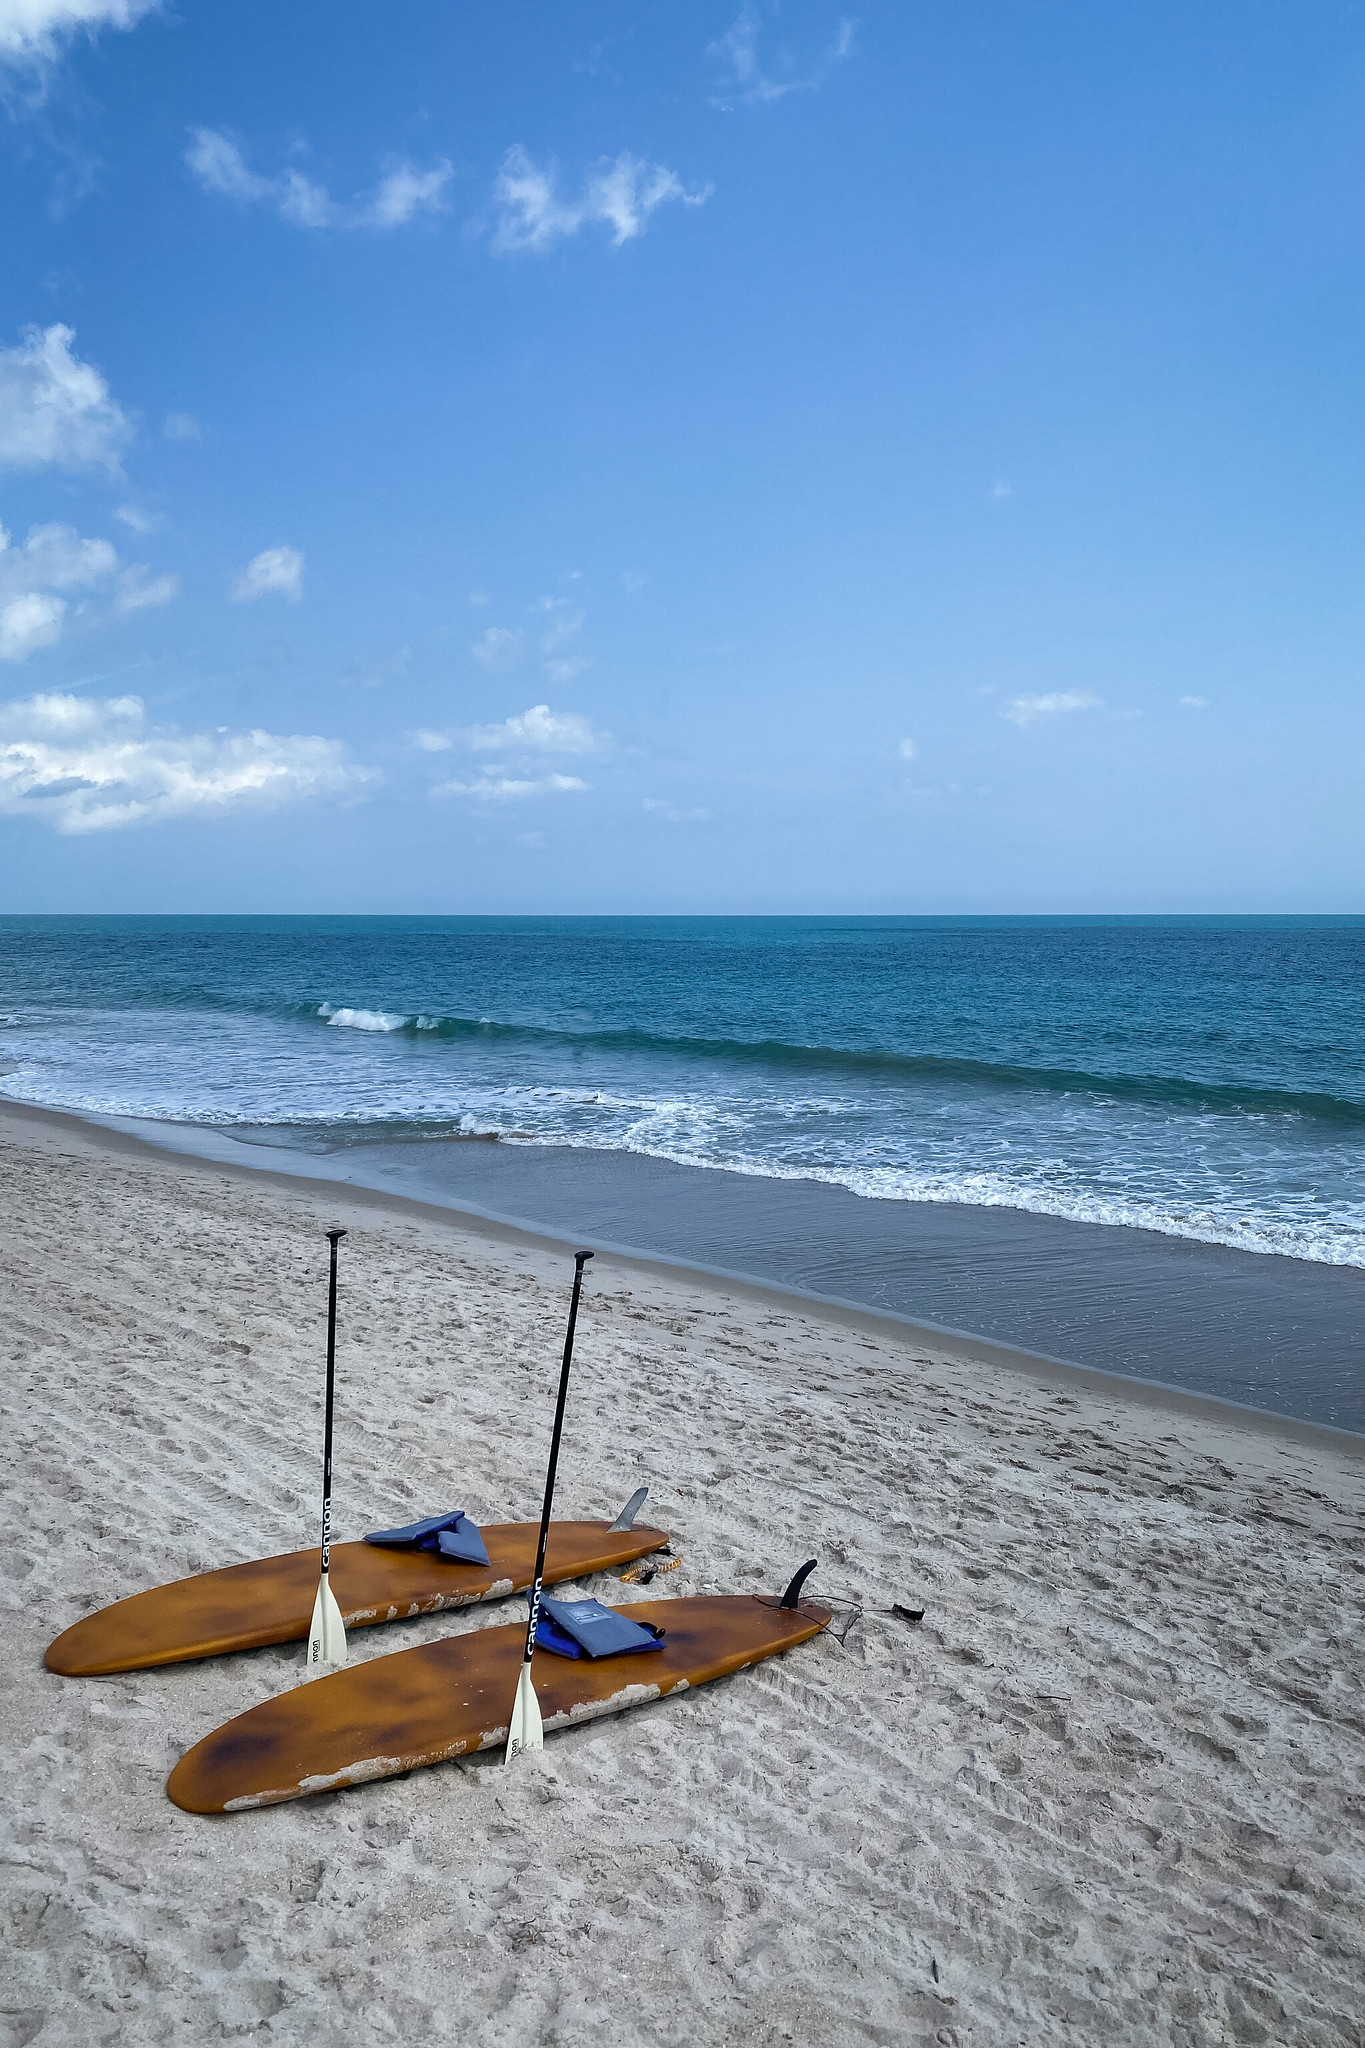 Paddleboarding | Best Things to Do in Vero Beach, Florida | Ultimate Travel Guide Vero Beach, FL | What to do in Vero Beach | Best Restaurants Vero Beach | What to Eat in Vero Beach Florida | Visit Indian River County Florida | Treasure Coast Travel Guide | Southern Florida Vacation